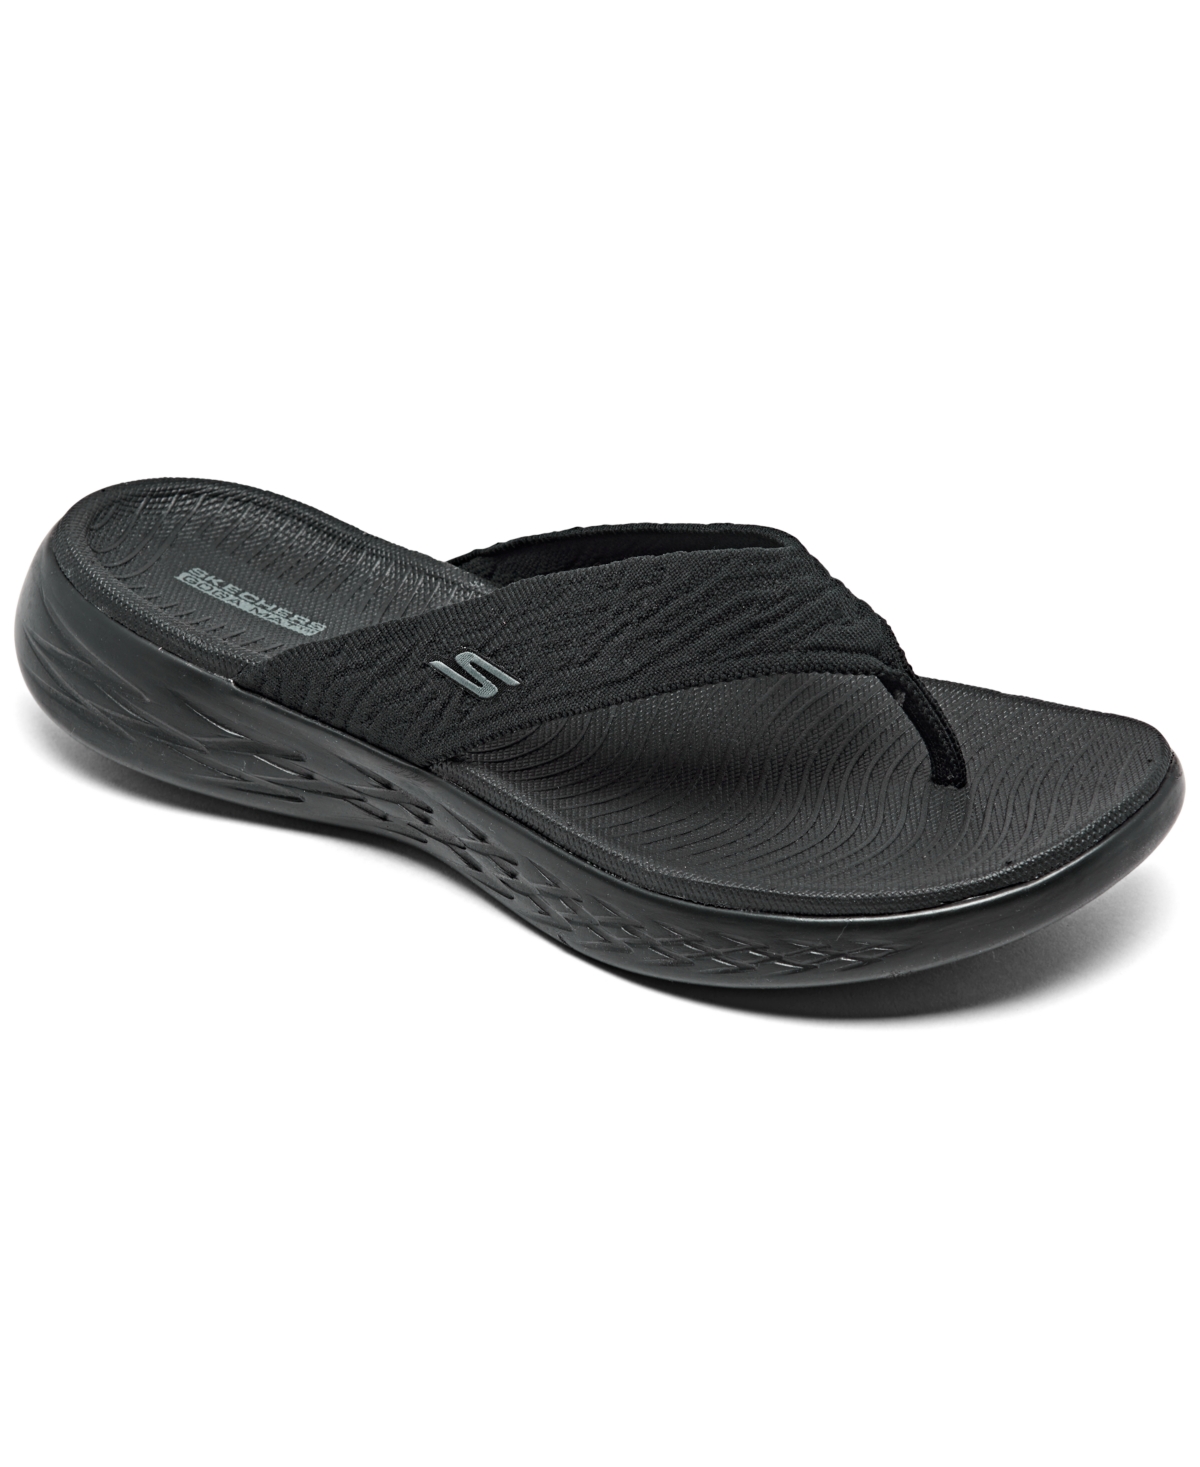 Women's On The Go 600 Sunny Athletic Flip Flop Thong Sandals from Finish Line - Black